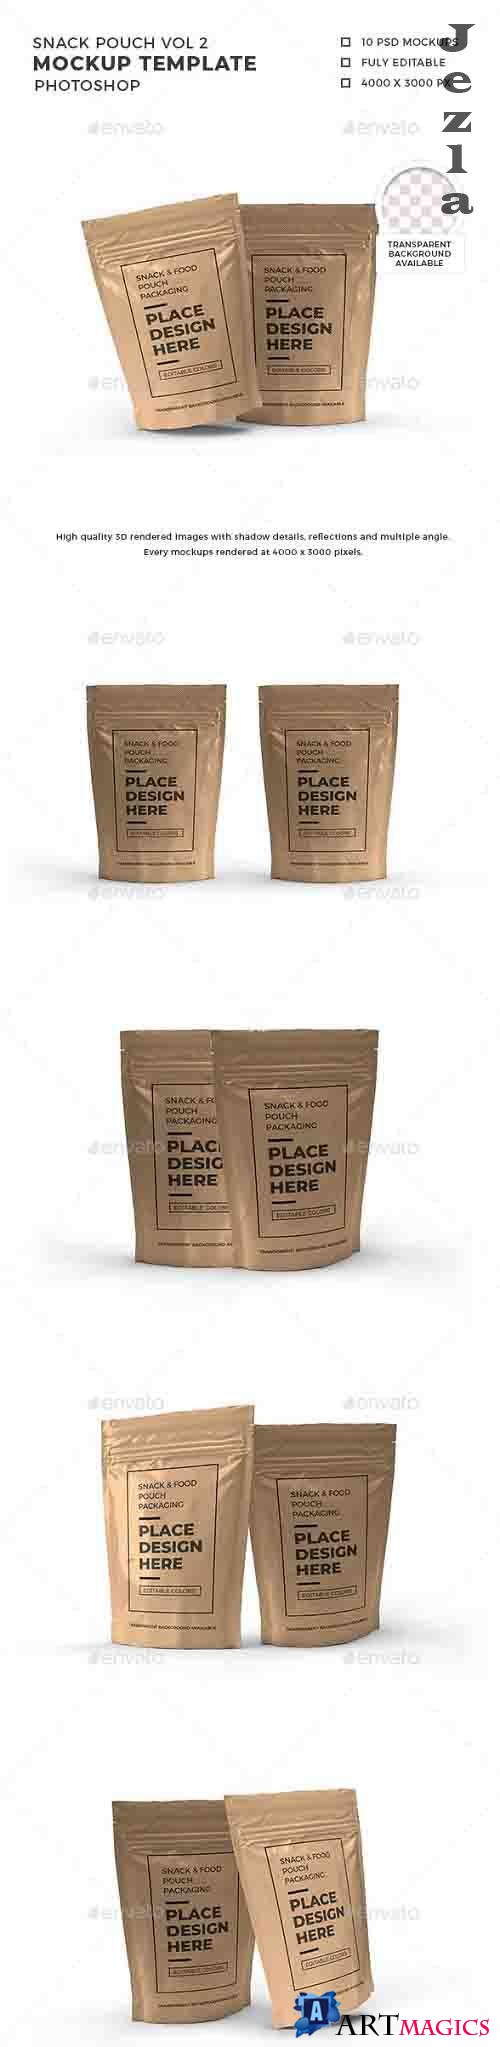 Snack Pouch Packaging Mockup Template Vol 2 - 32588901